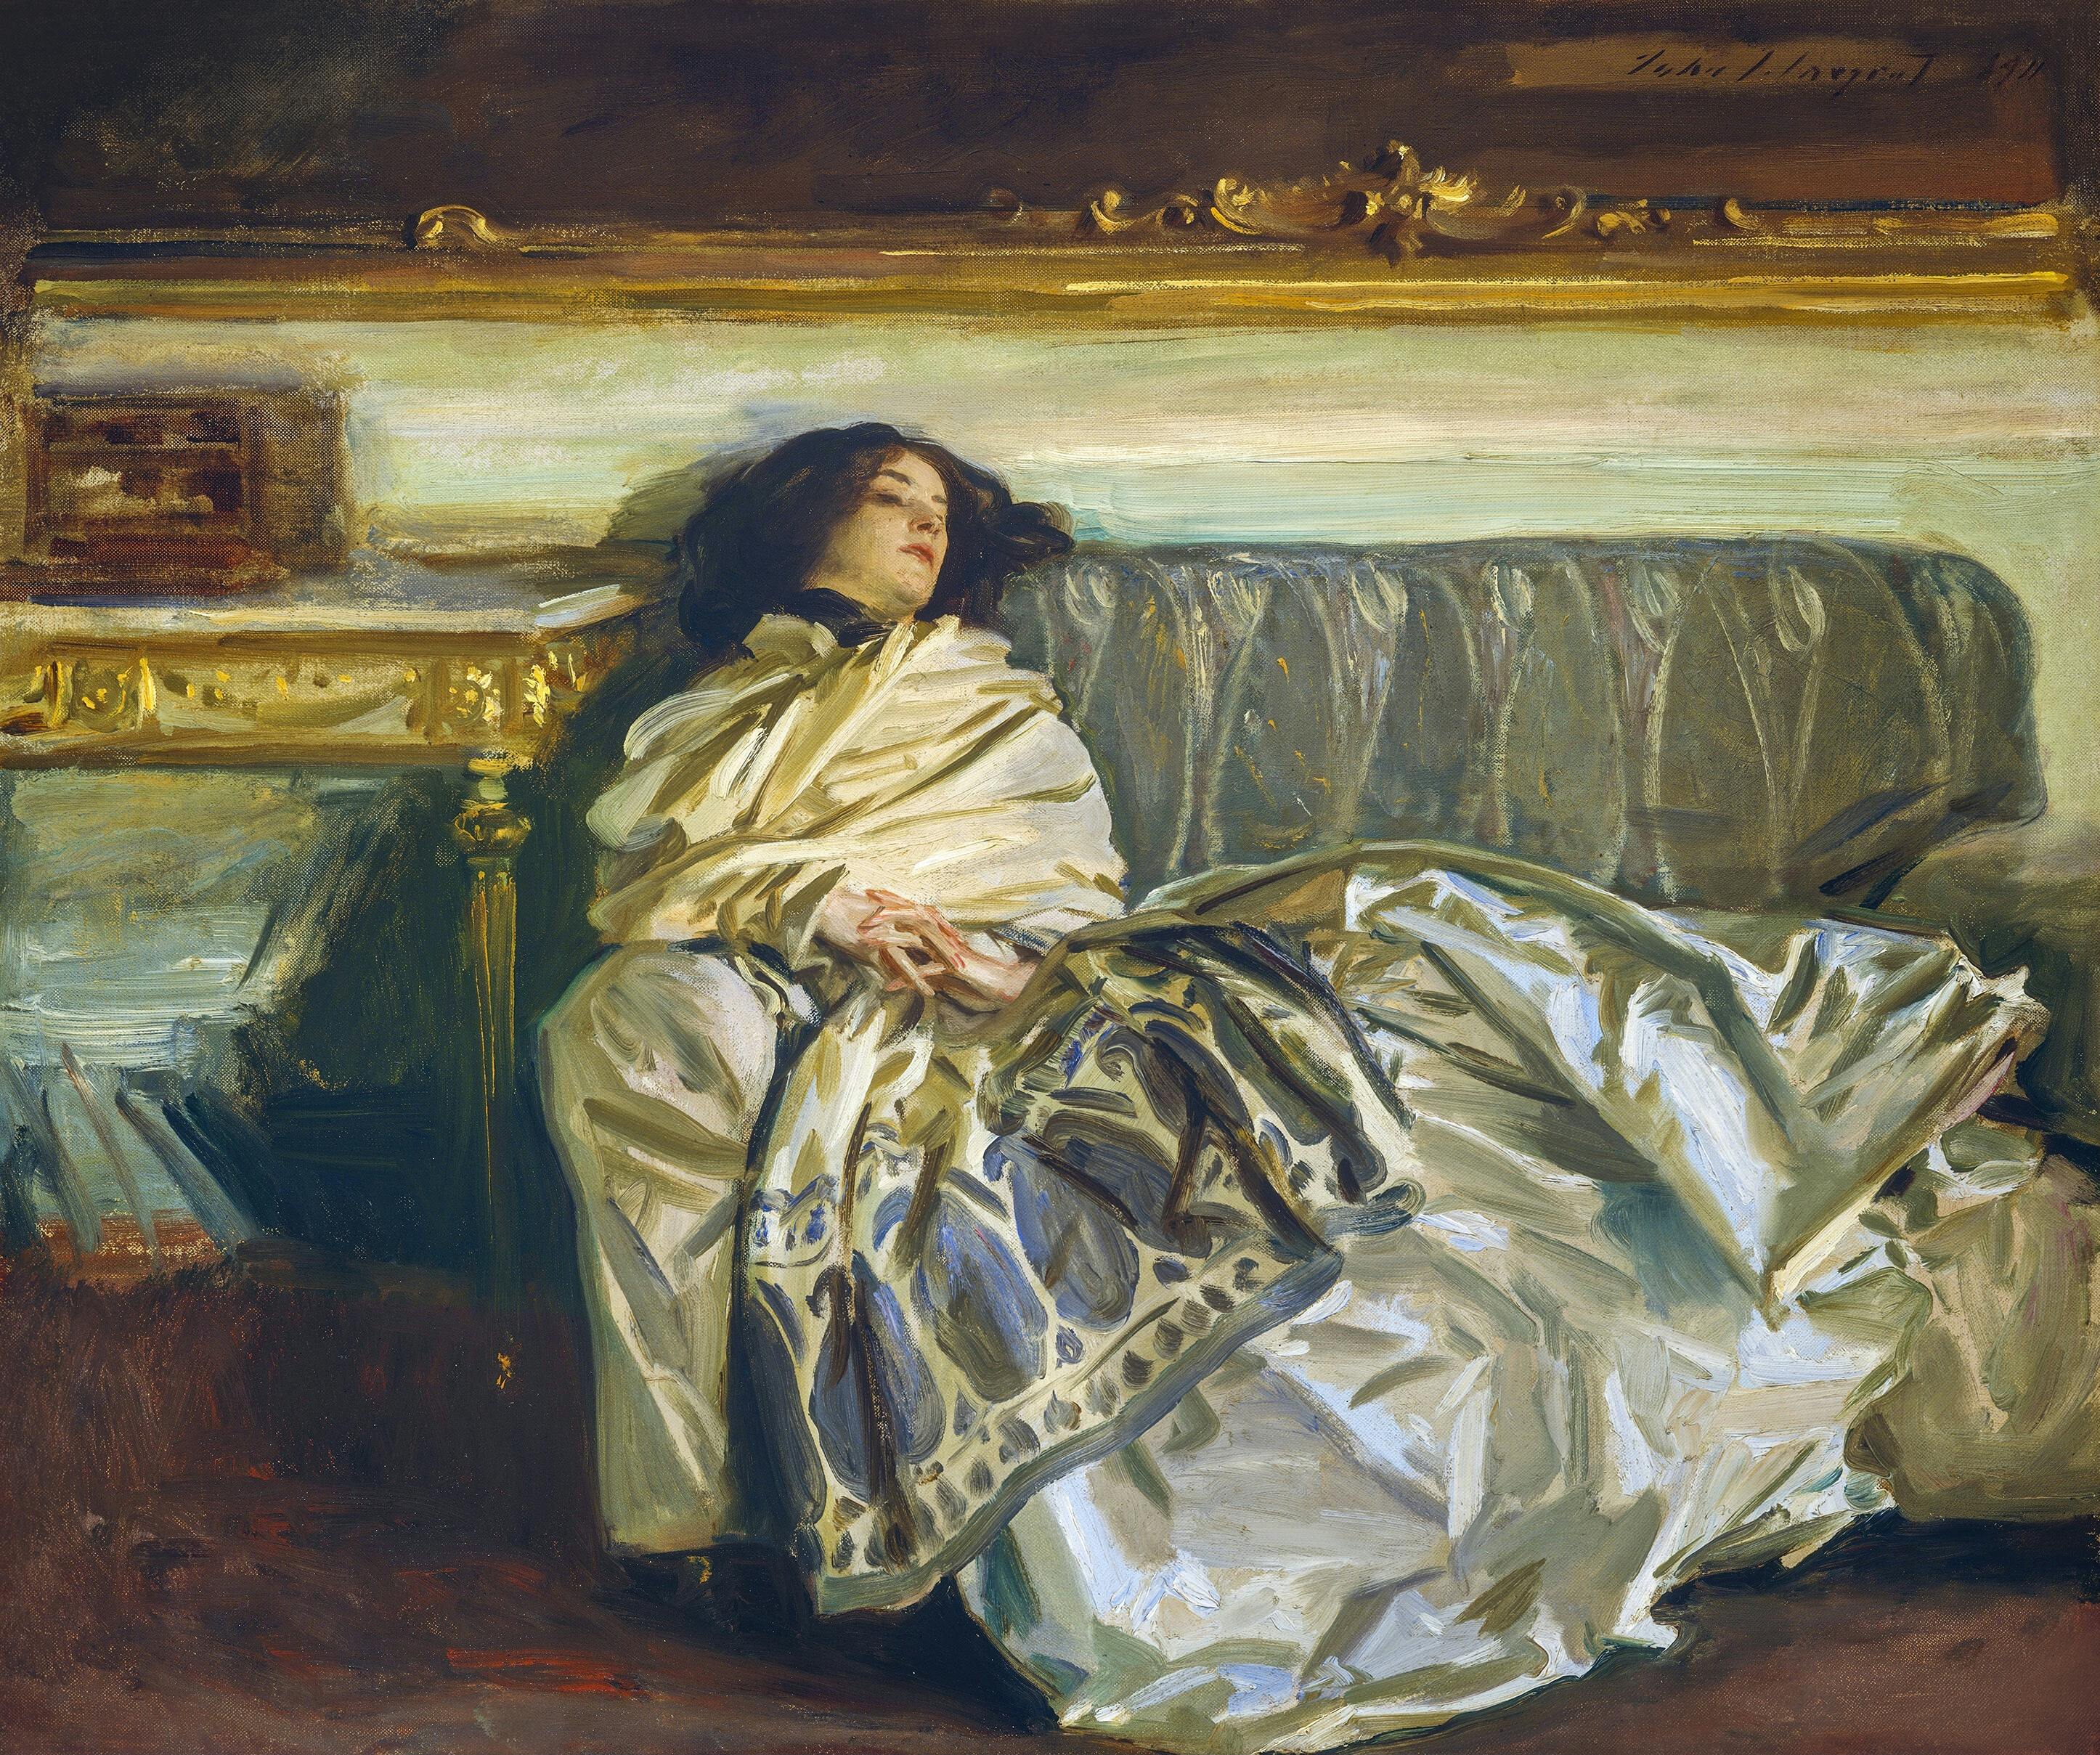 <p>Nonchaloir (1911) by John Singer Sargent. Original from The National Gallery of Art. Digitally enhanced by rawpixel.</p>
